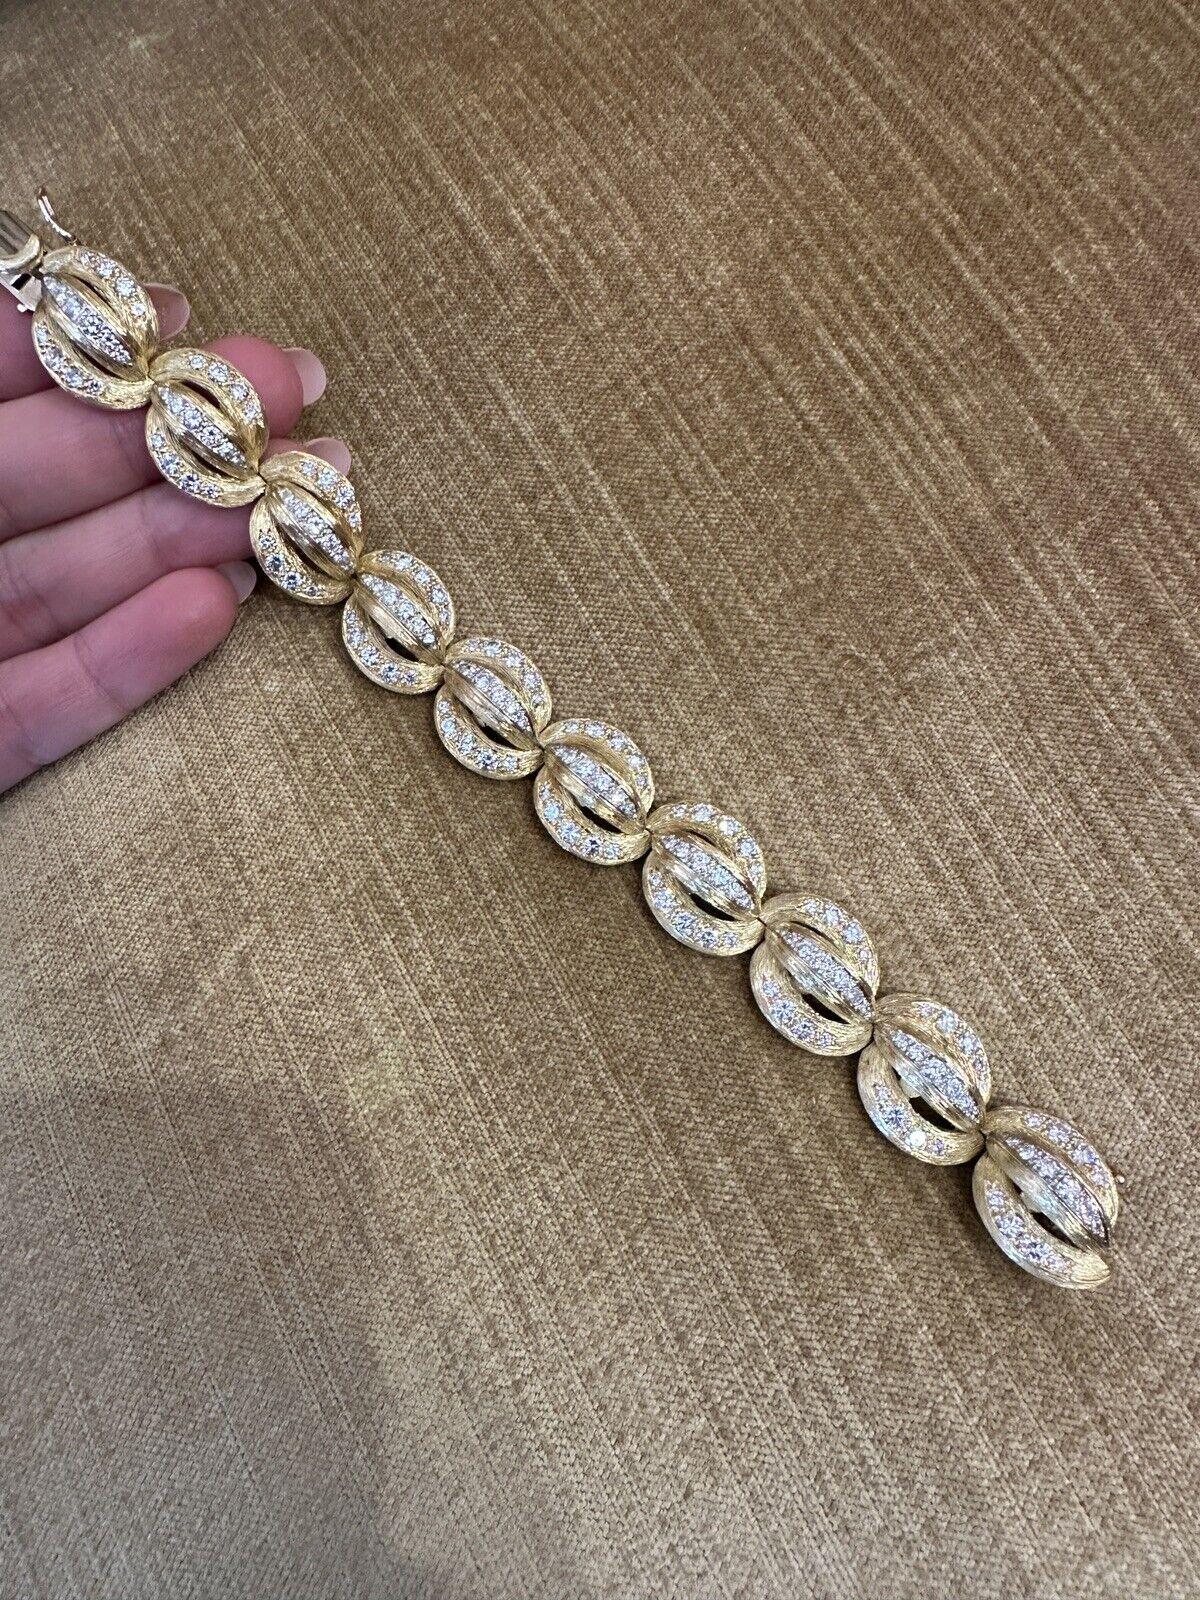 Heavy Vintage Diamond Link Textured Bracelet in 18k Yellow Gold 

The bracelet features 10 textured links with Round Brilliant Diamonds pave set in 18k Yellow Gold. Bracelet is secured by a tongue clasp with safety bar and clasp.

Total diamond